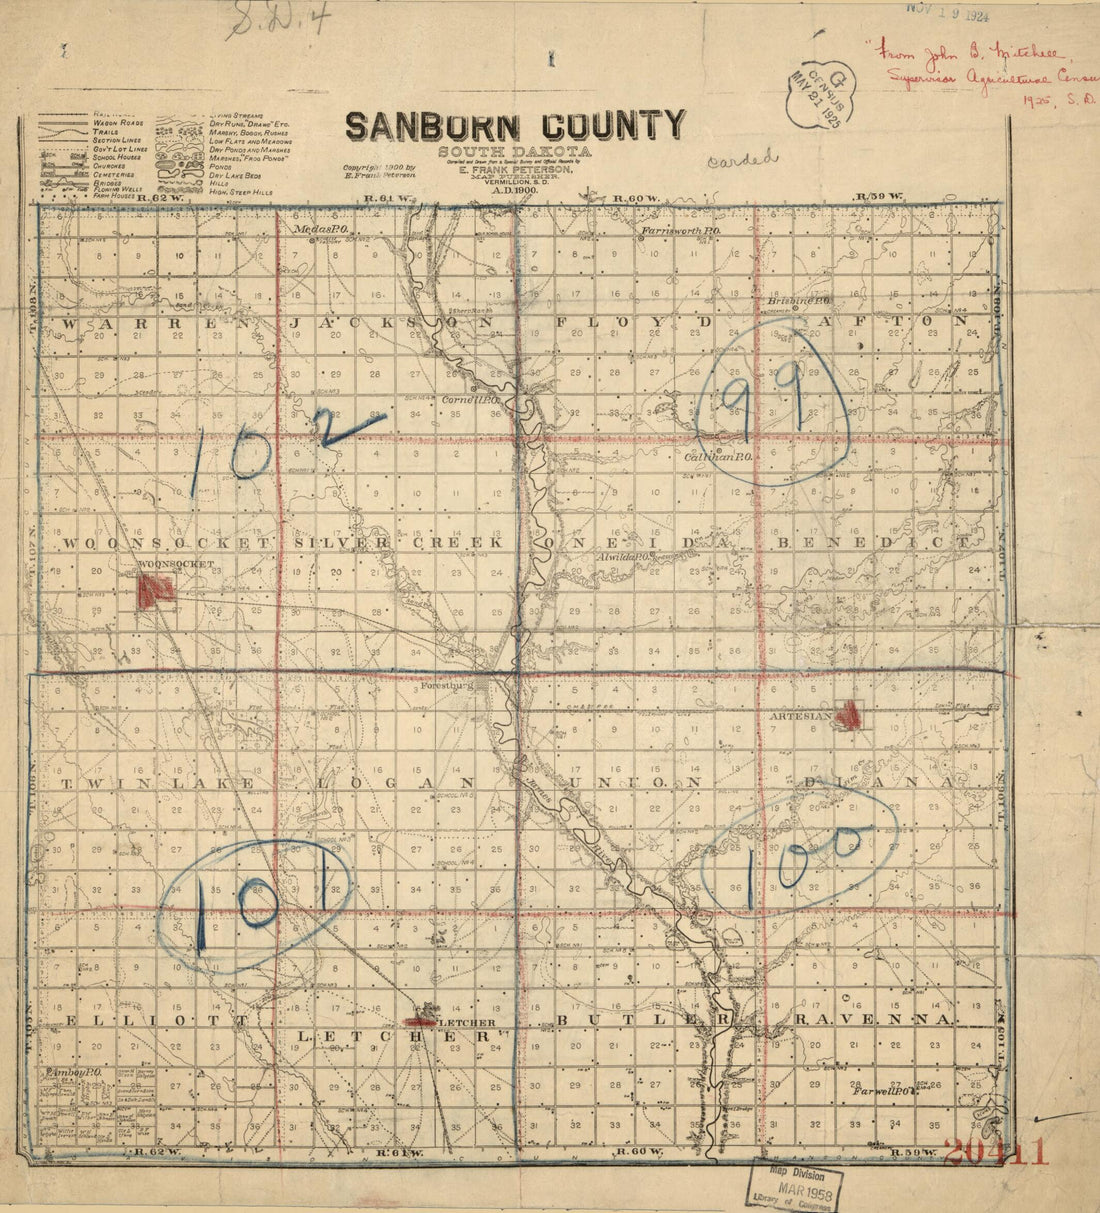 This old map of Sanborn County, South Dakota : Compiled and Drawn from a Special Survey and Official Records from 1900 was created by E. Frank Peterson in 1900